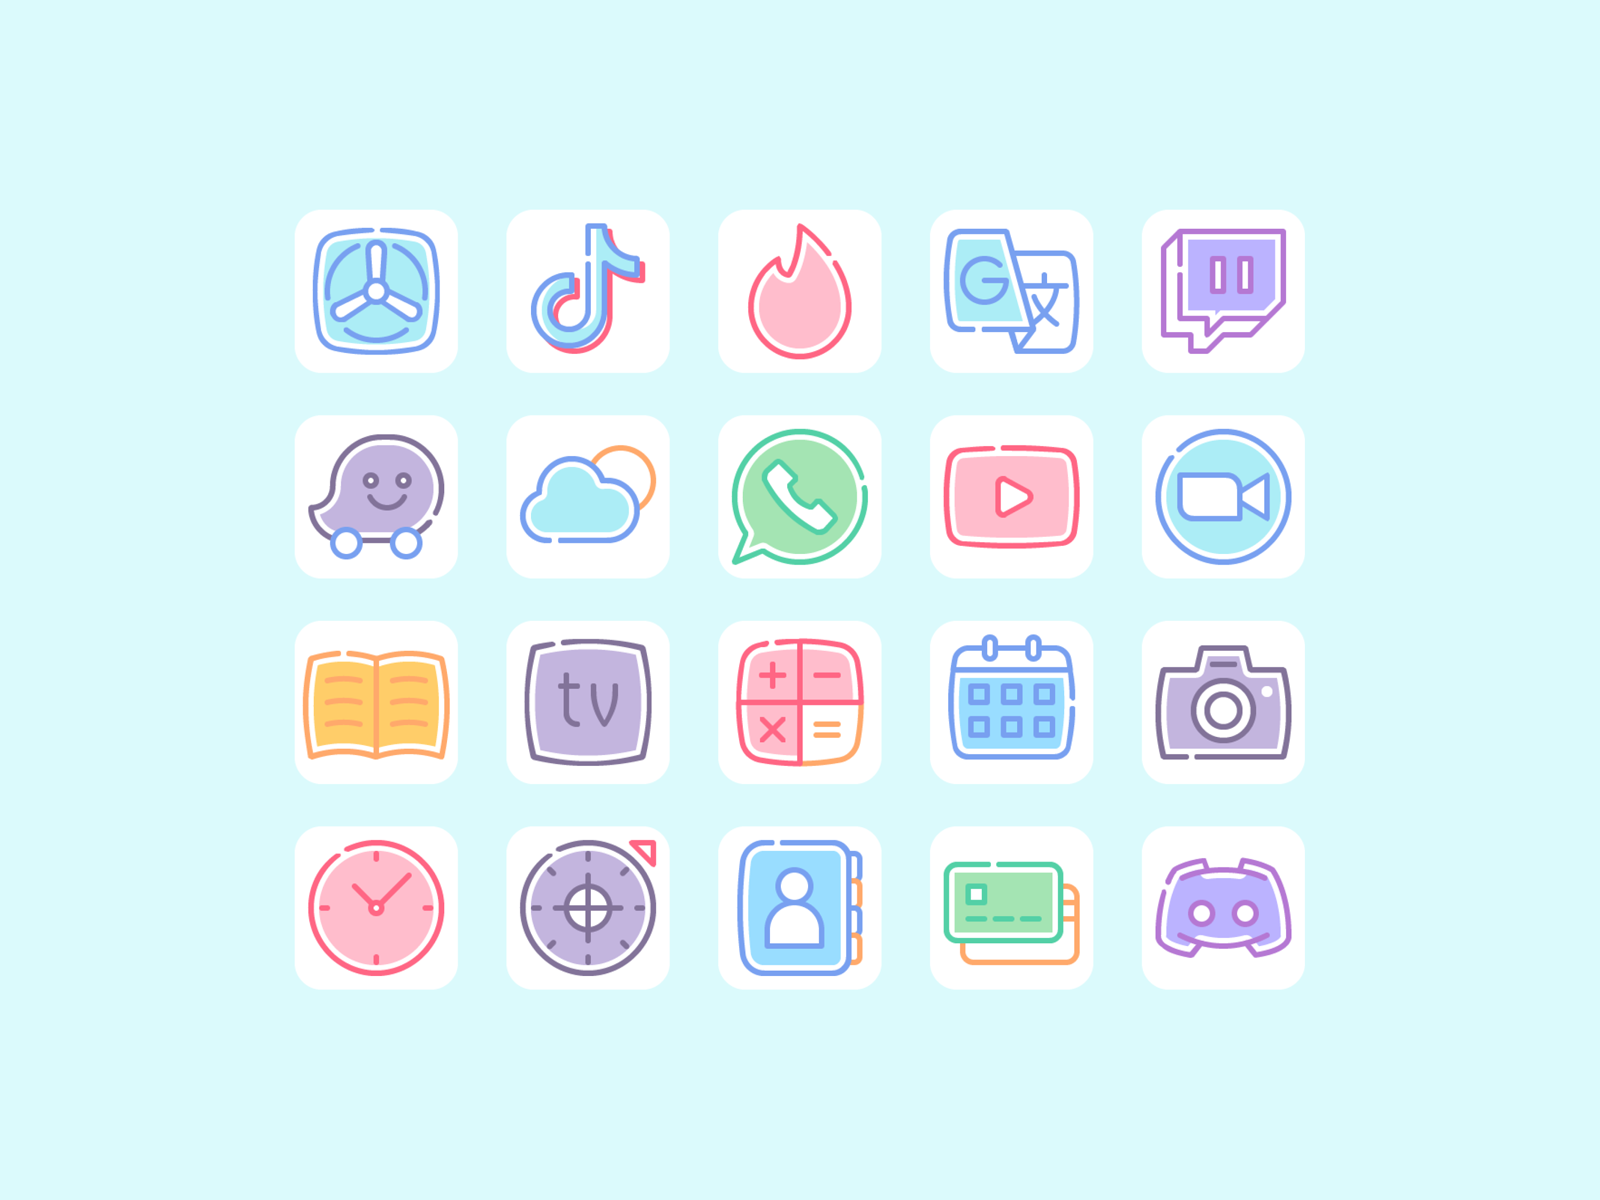 Free iOS 16 icon set by Mackenzie L for Krafted on Dribbble